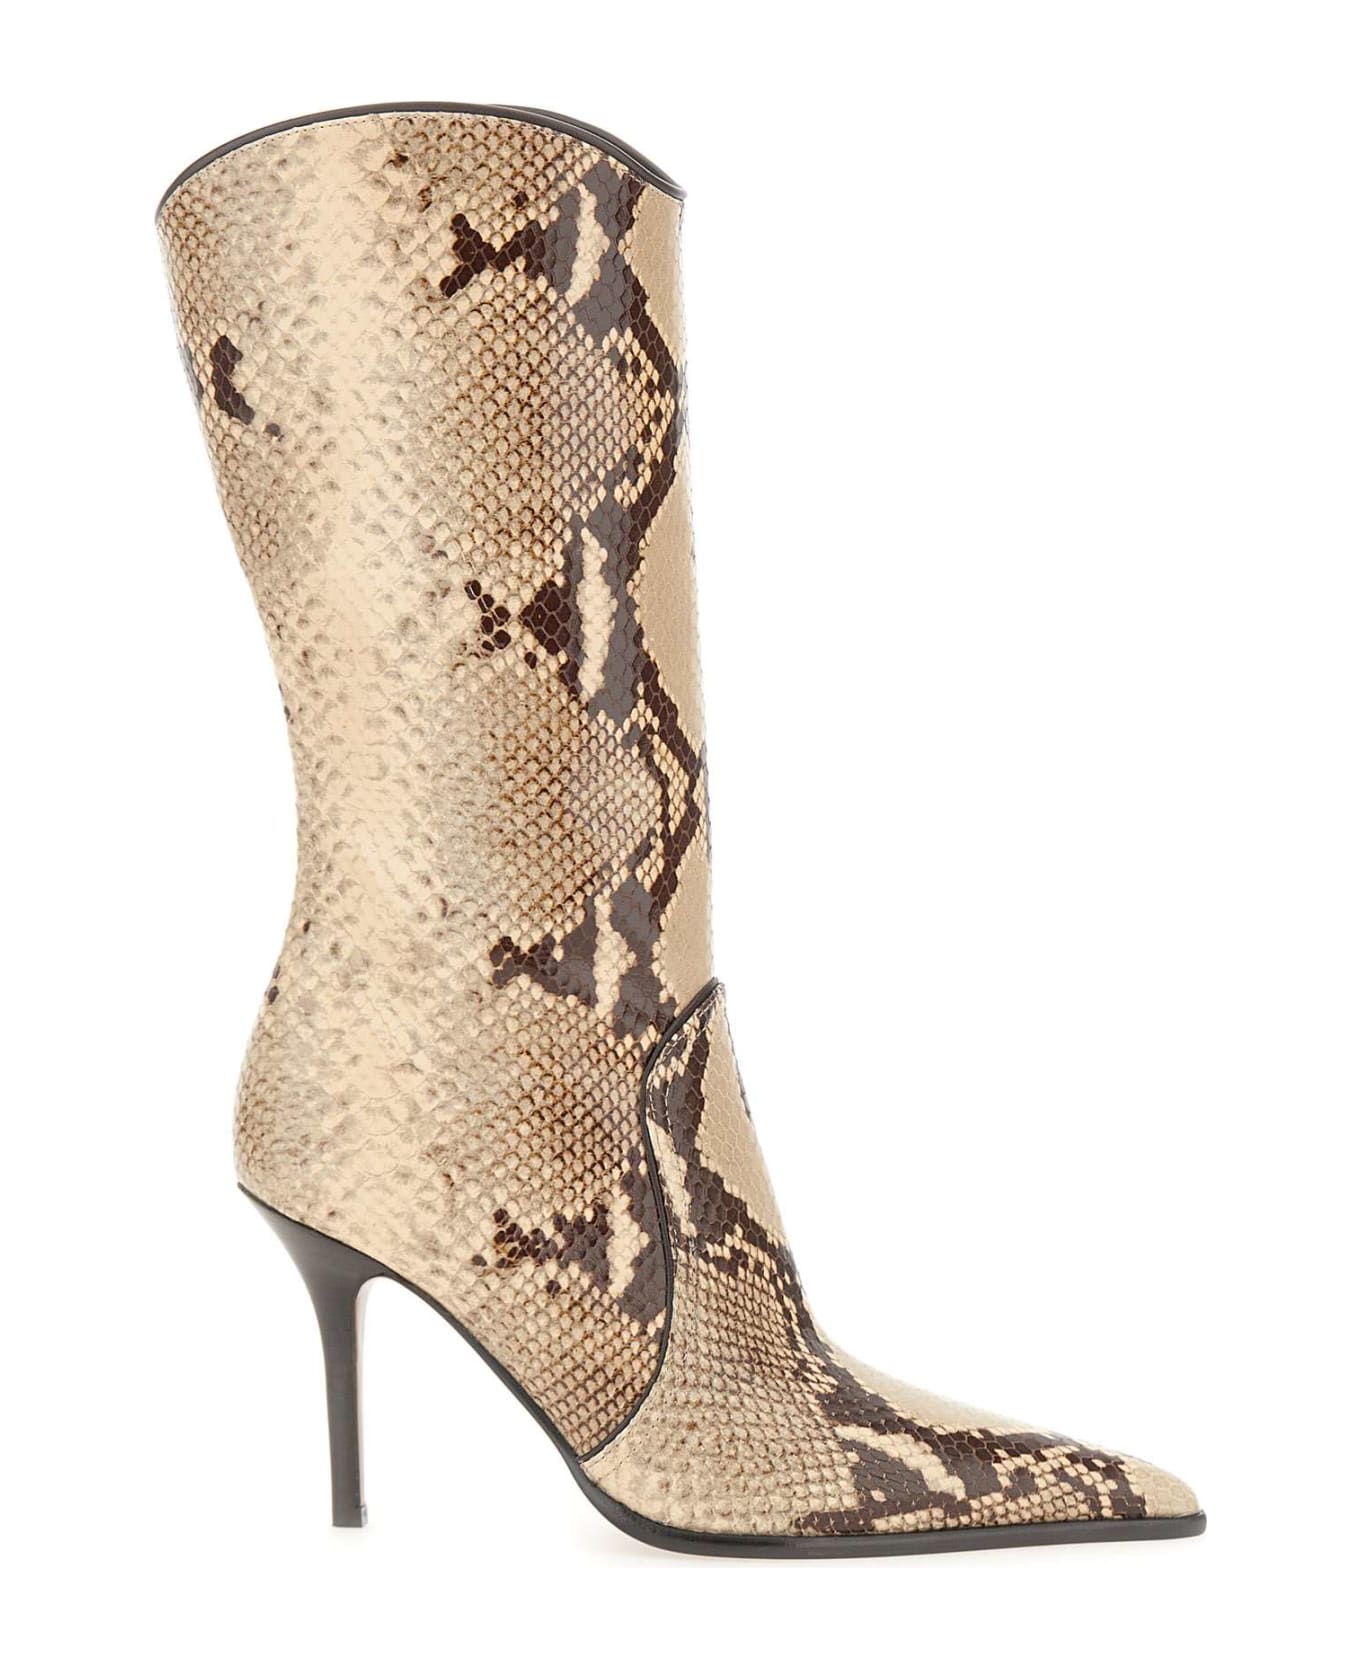 Paris Texas 'ahsley Midcalf' Leather Boots - BEIGE